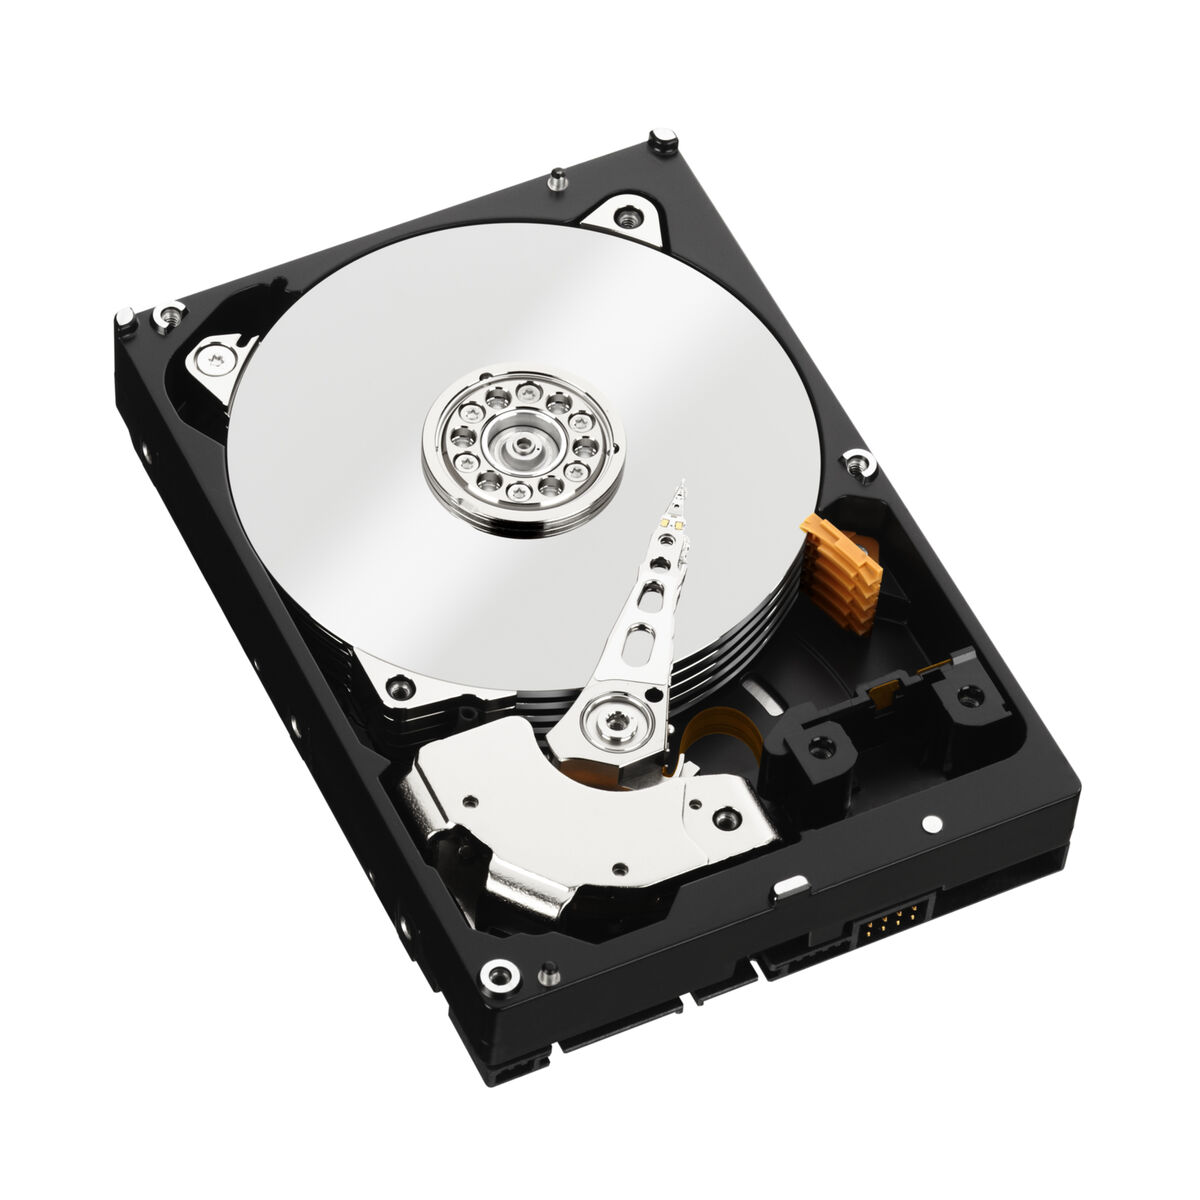 HDD WD Red WD60EFAX 6TB/8,9/600 Sata III 256MB (D) (SMR)